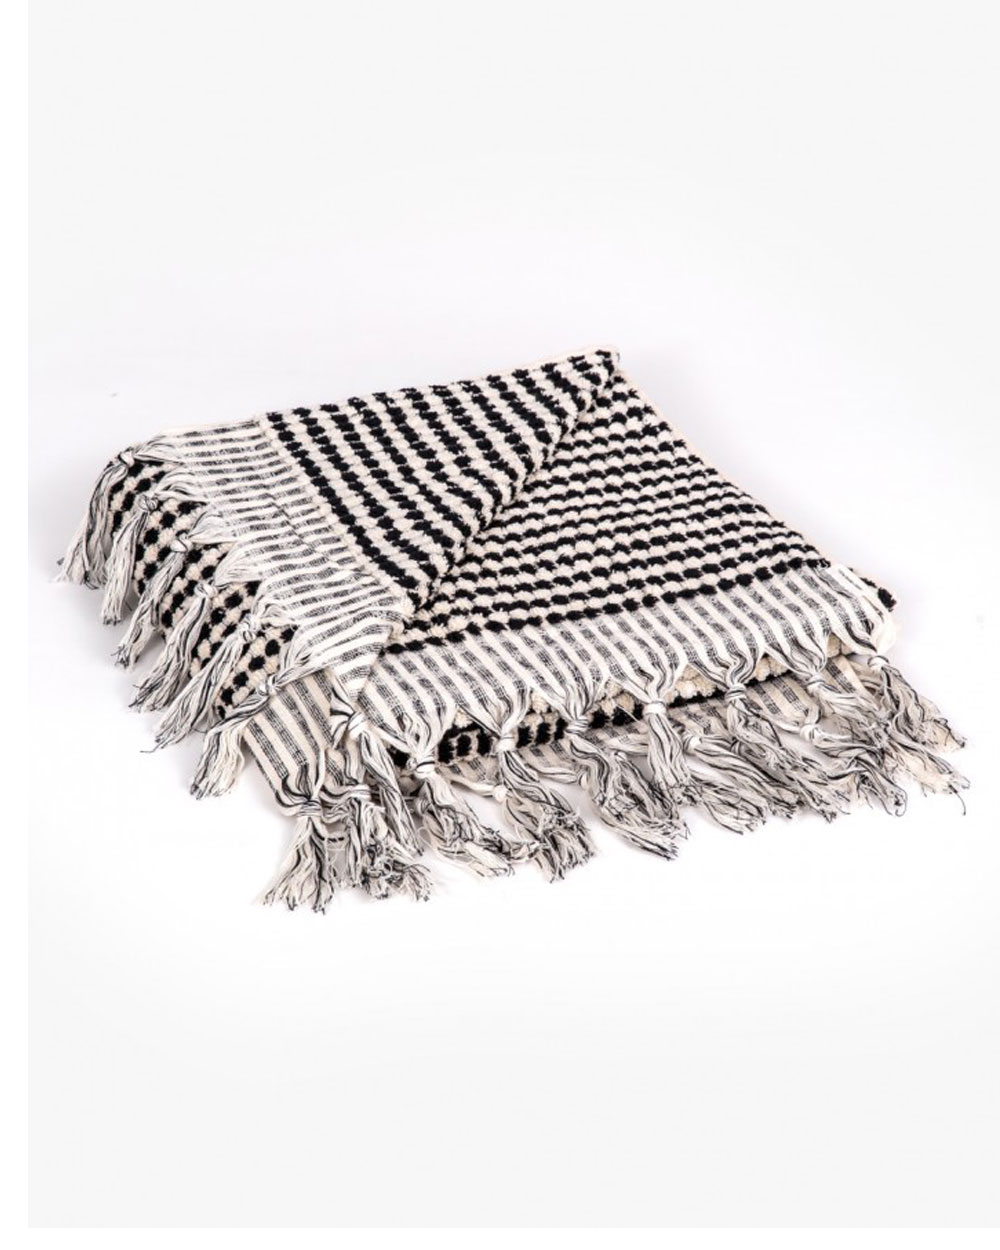 Crescent towel from Superette, $99